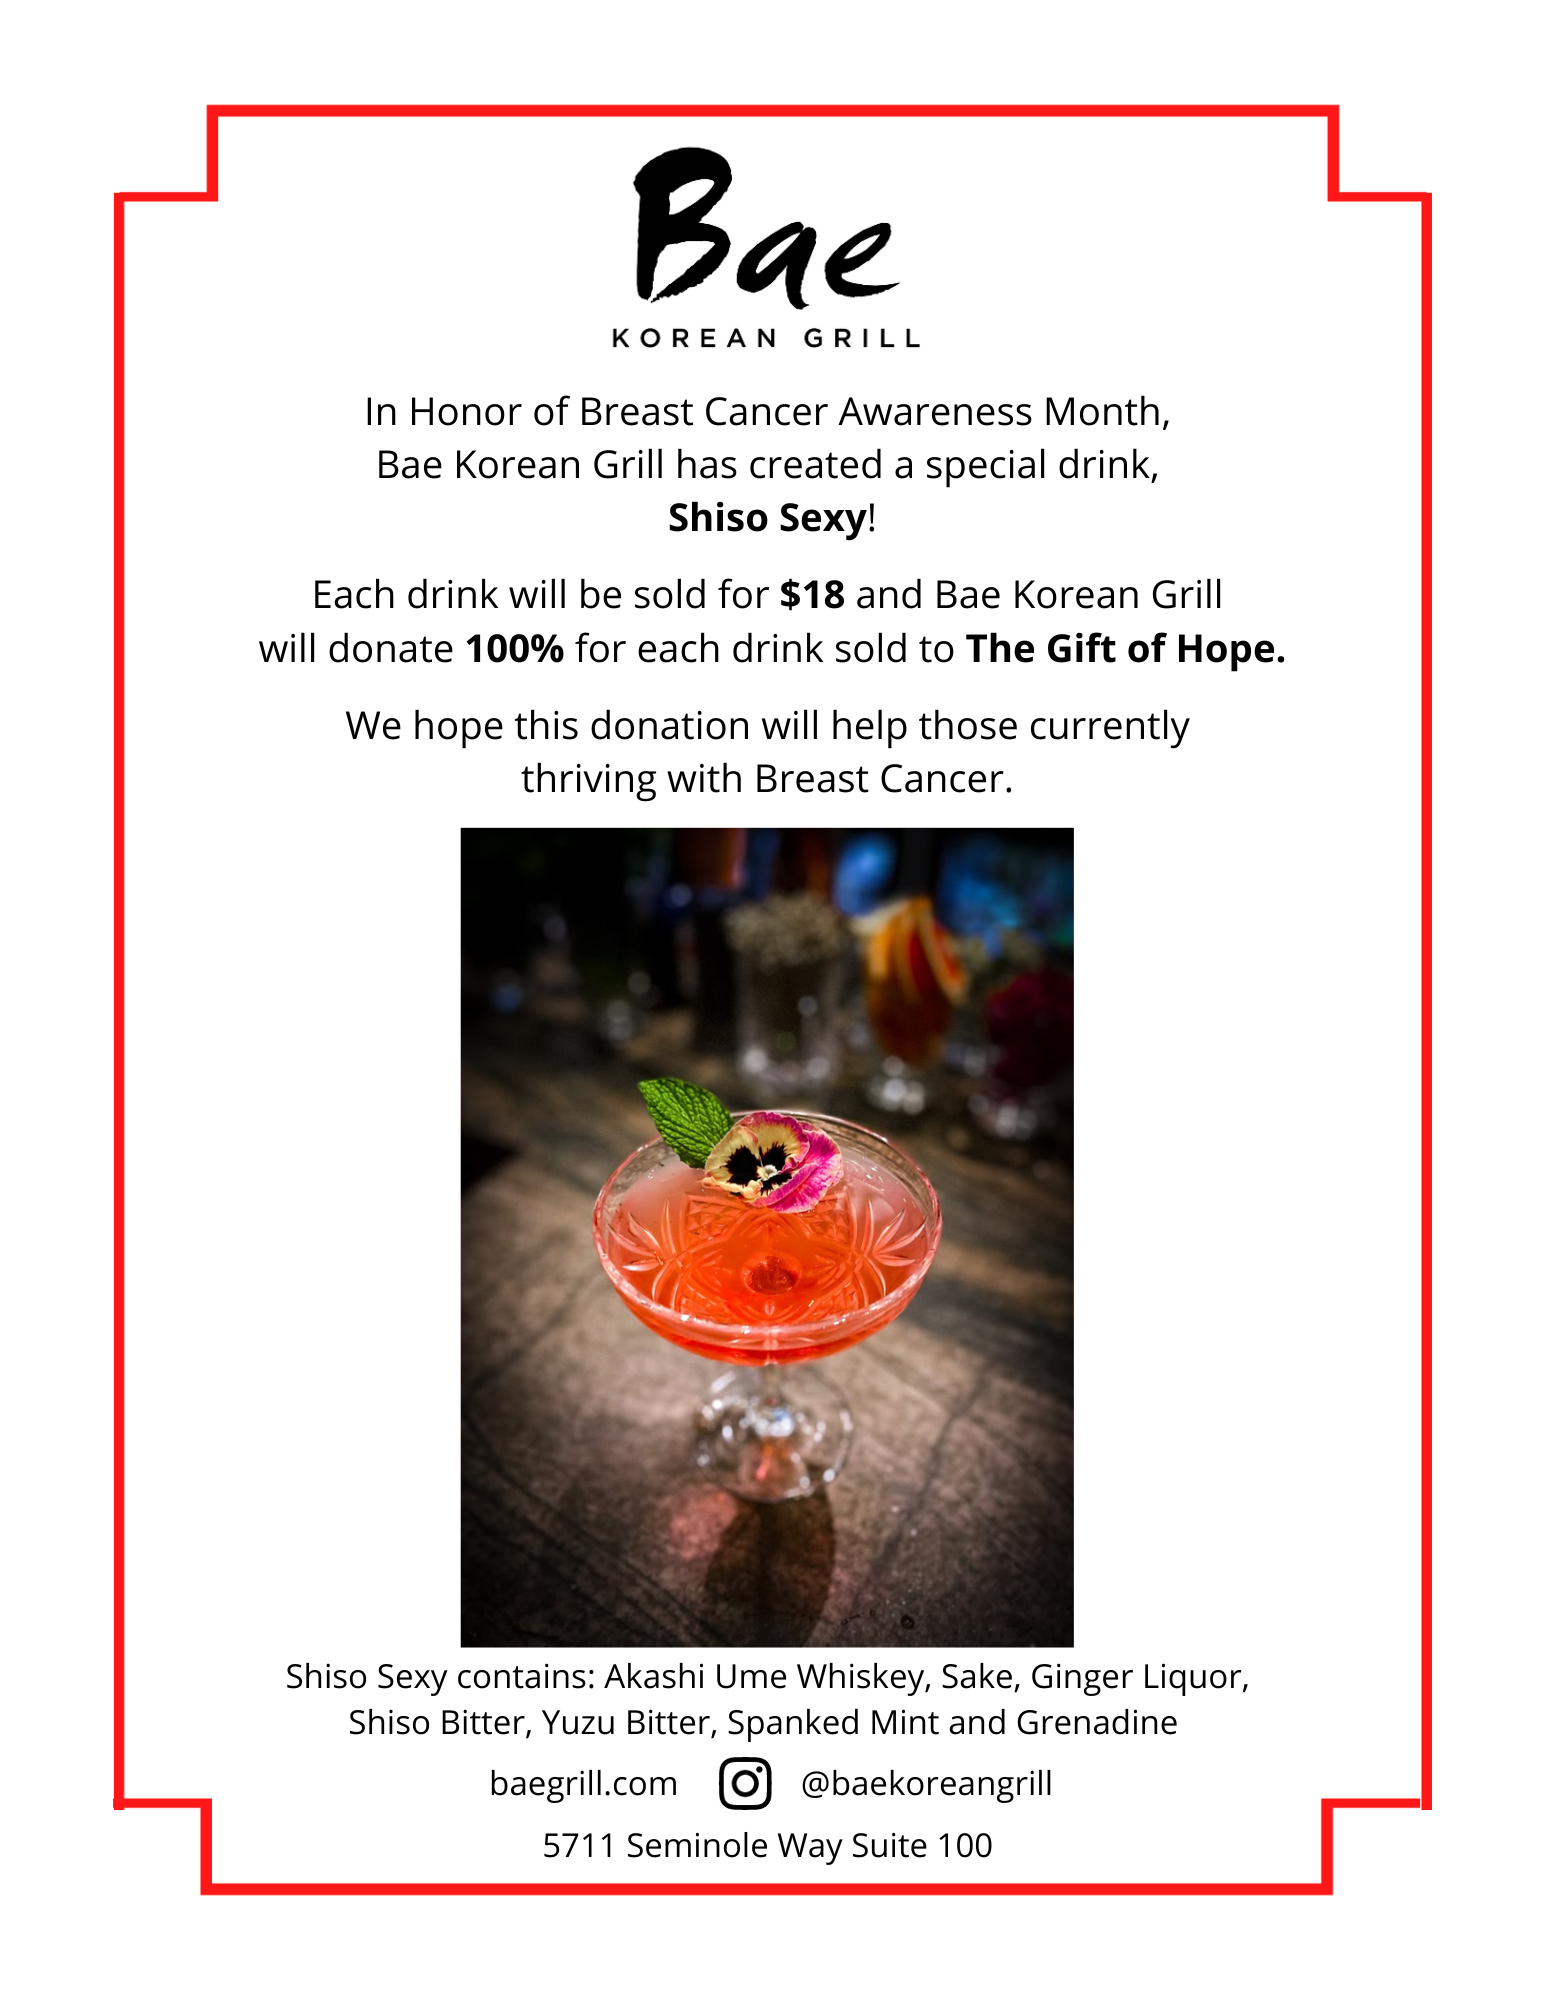 Bae Korean Grill - Special Cocktail's Proceeds go to Gift of Hope